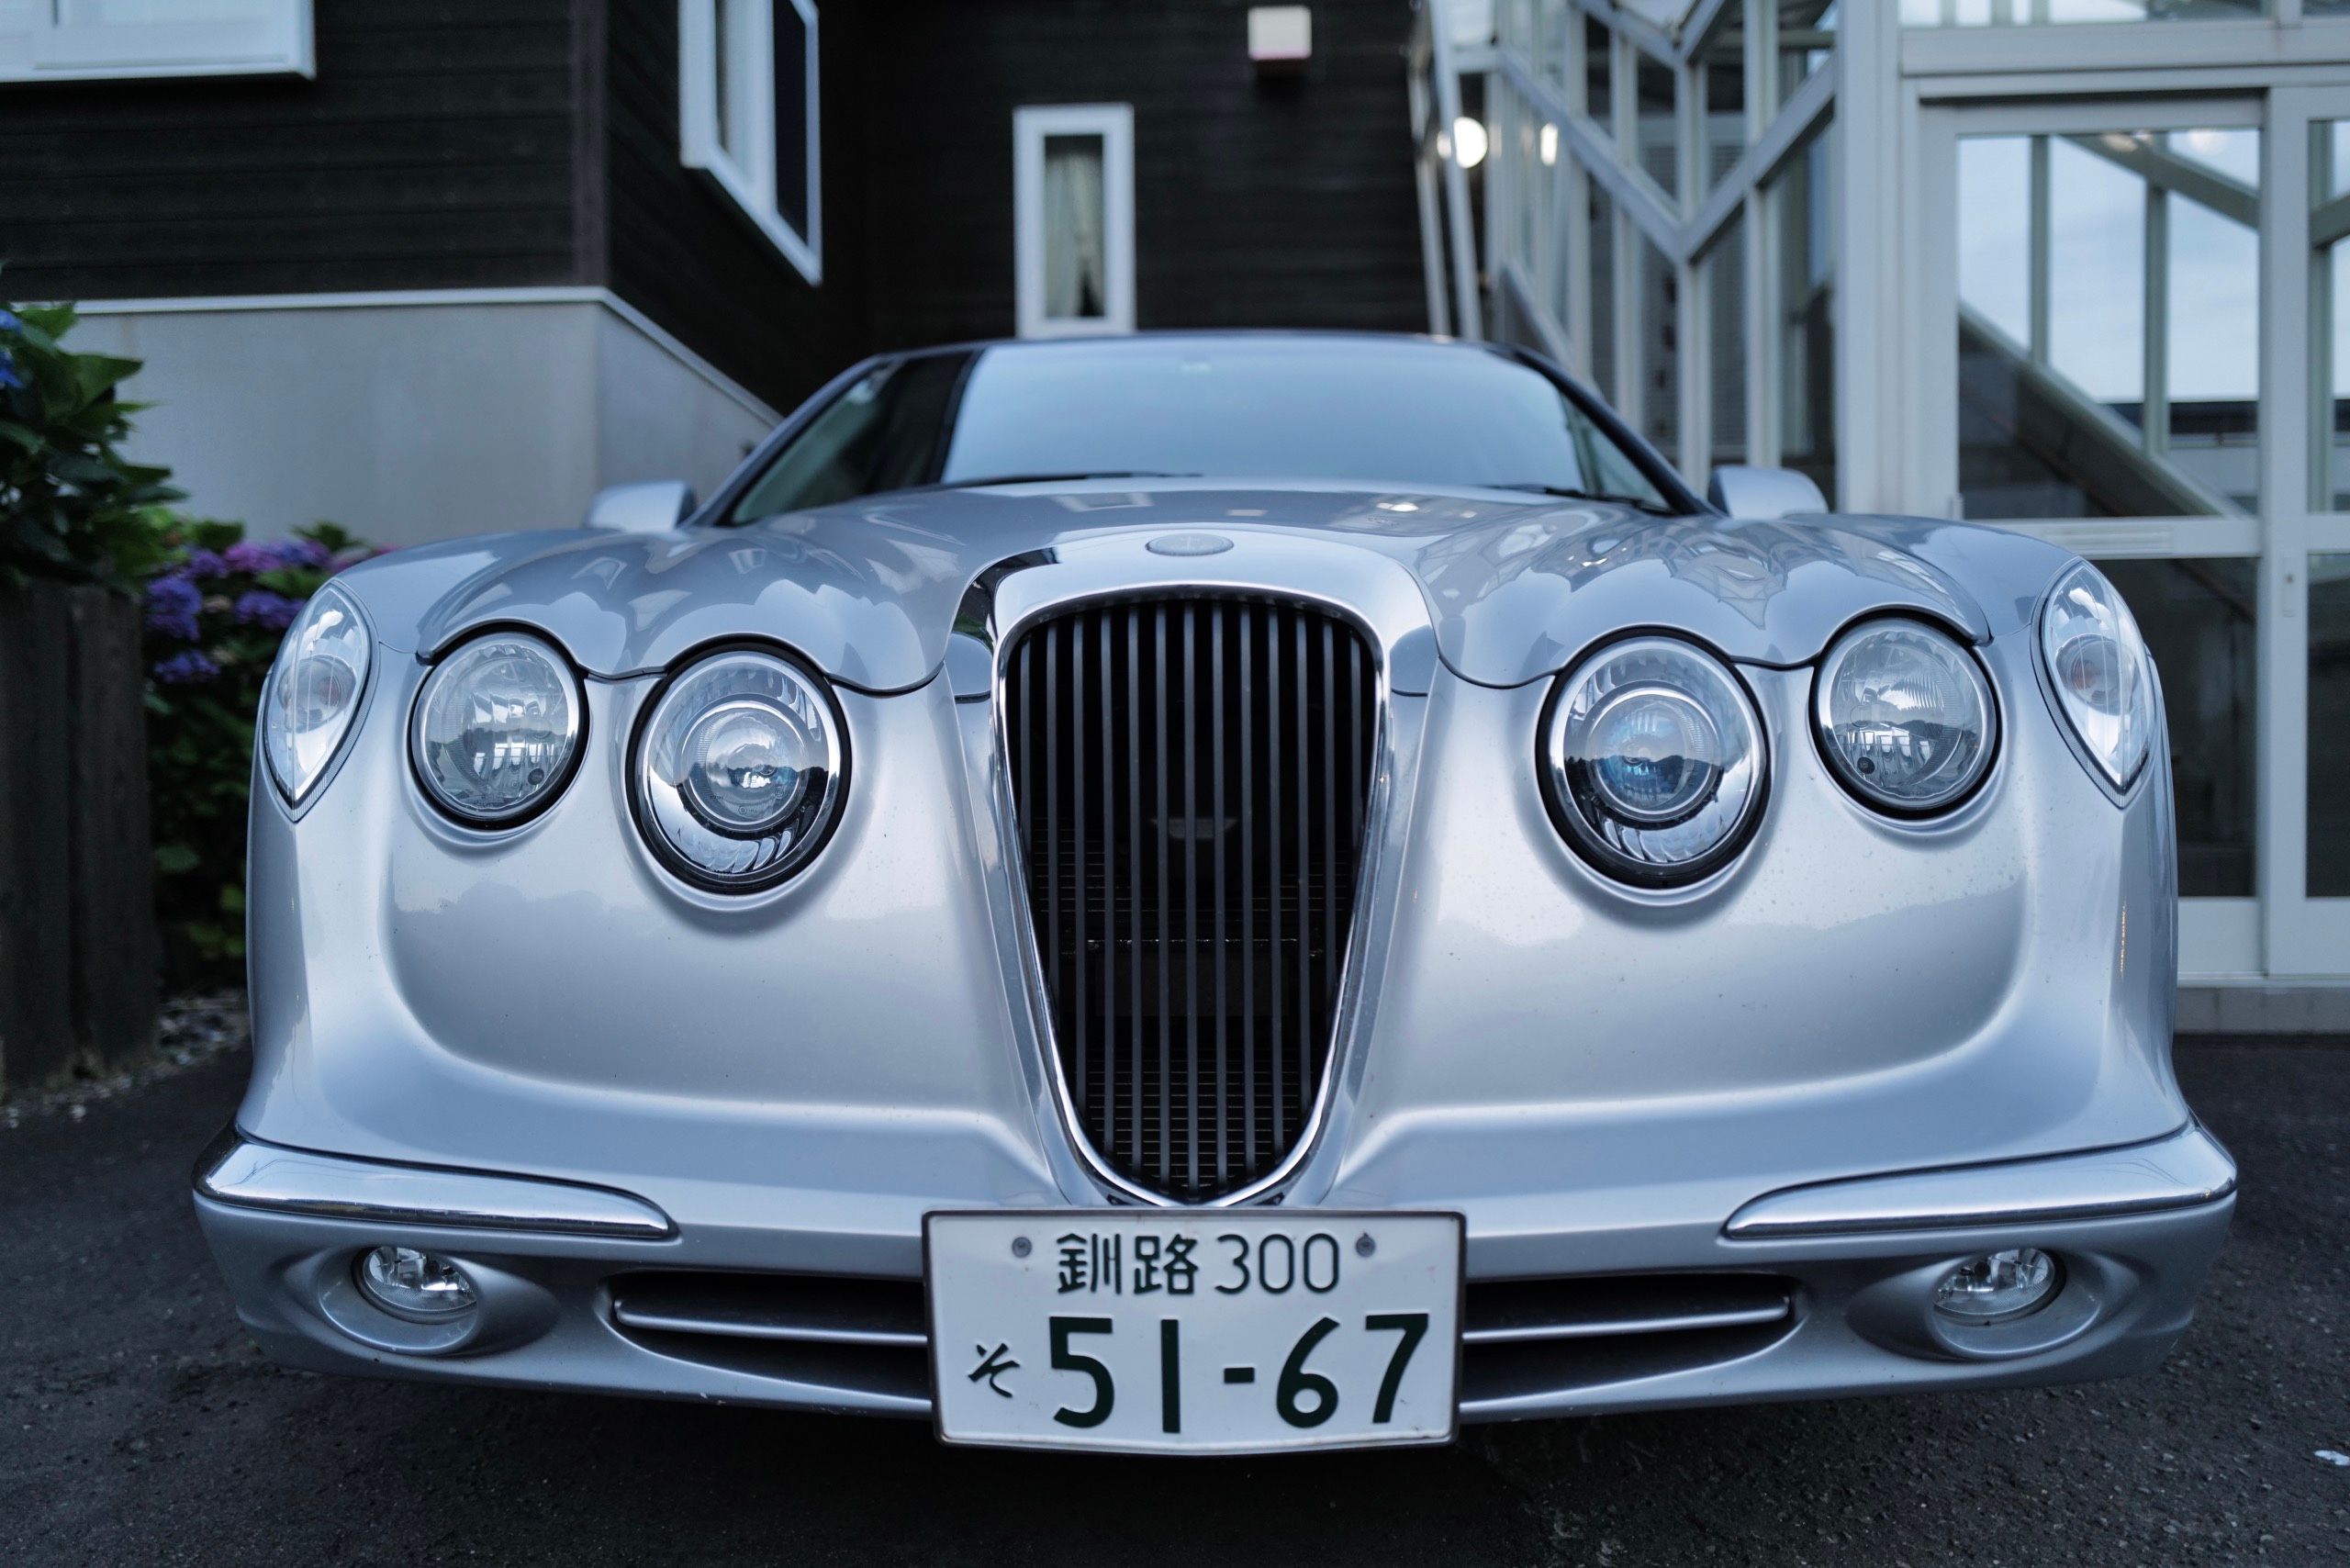 Closeup of the front of a Mitsuoka, an obscure Japanese car.